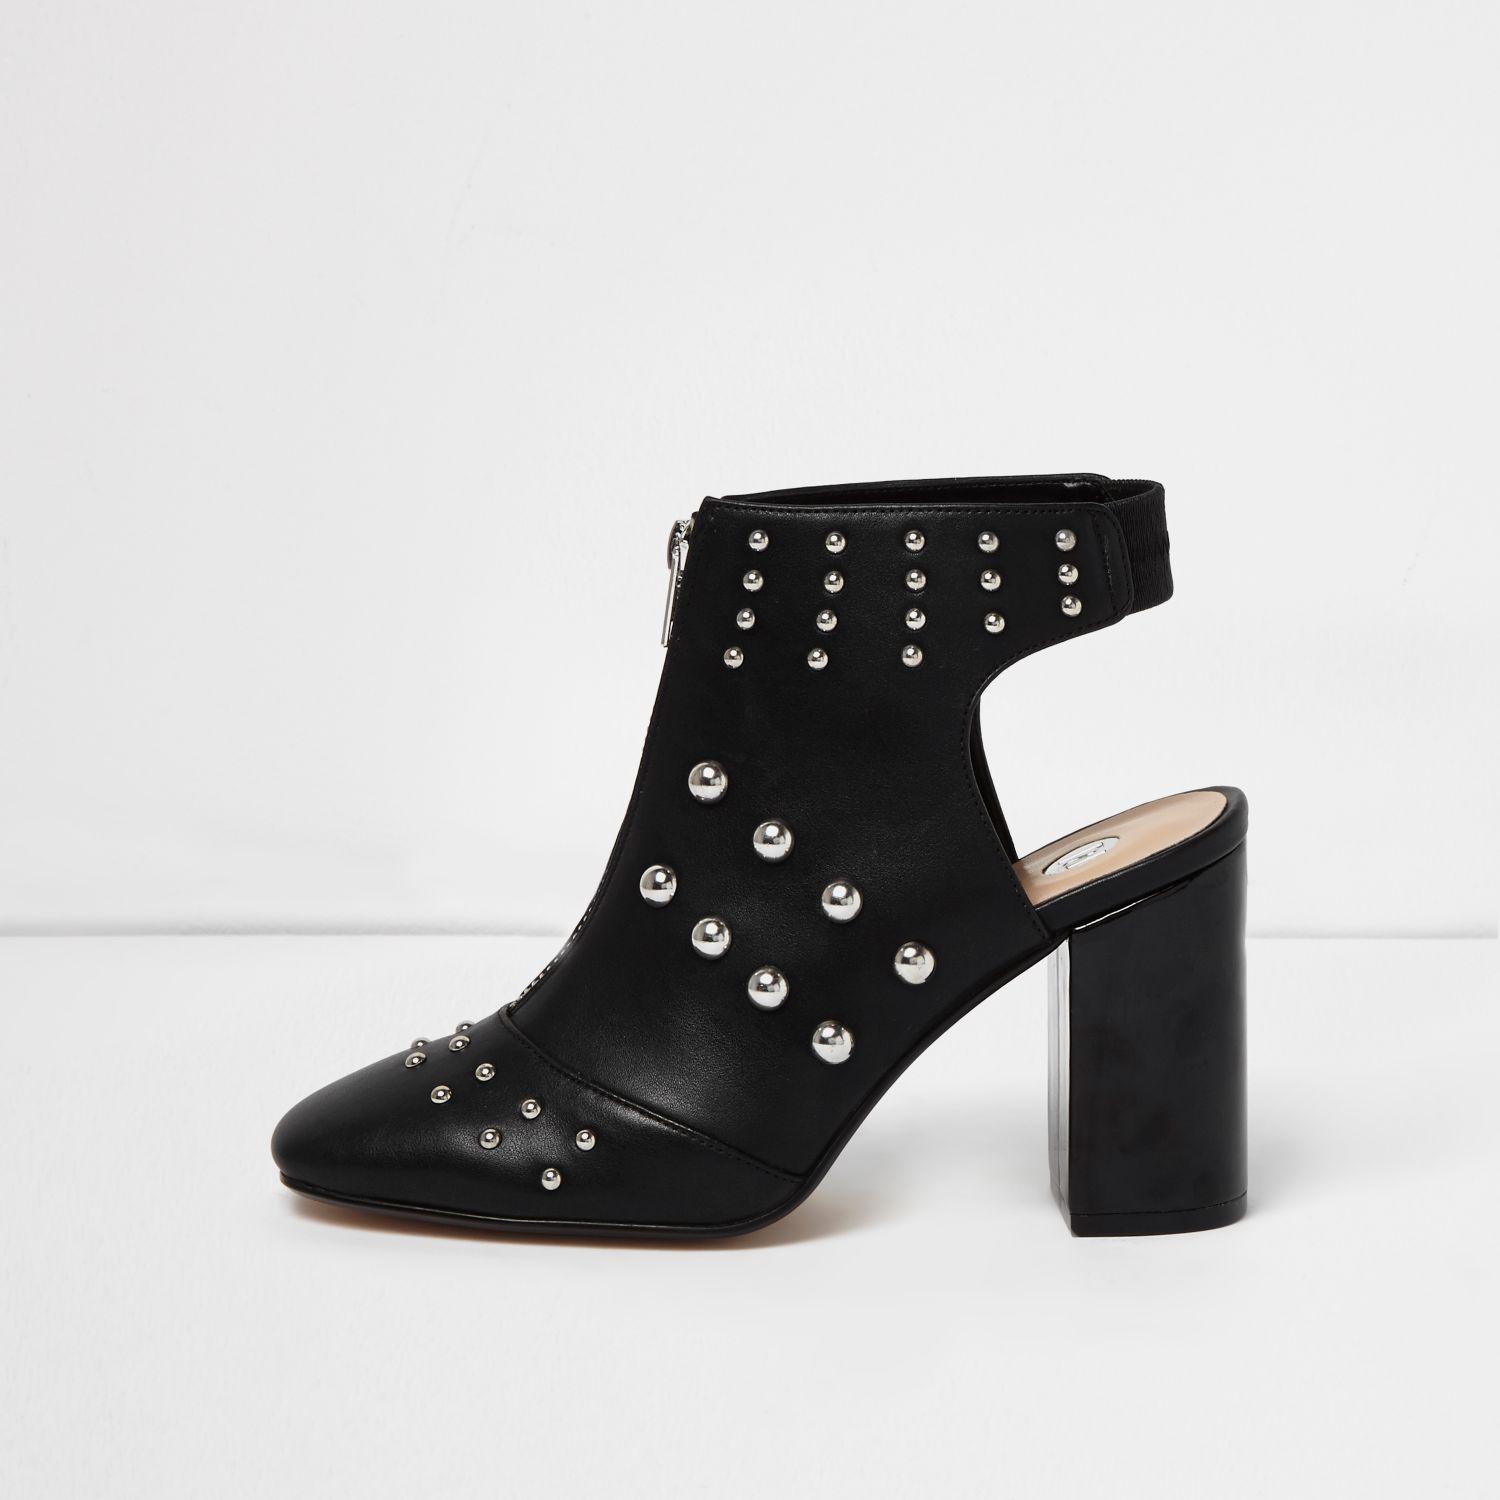 River Island Leather Black Studded Shoe Boots - Lyst